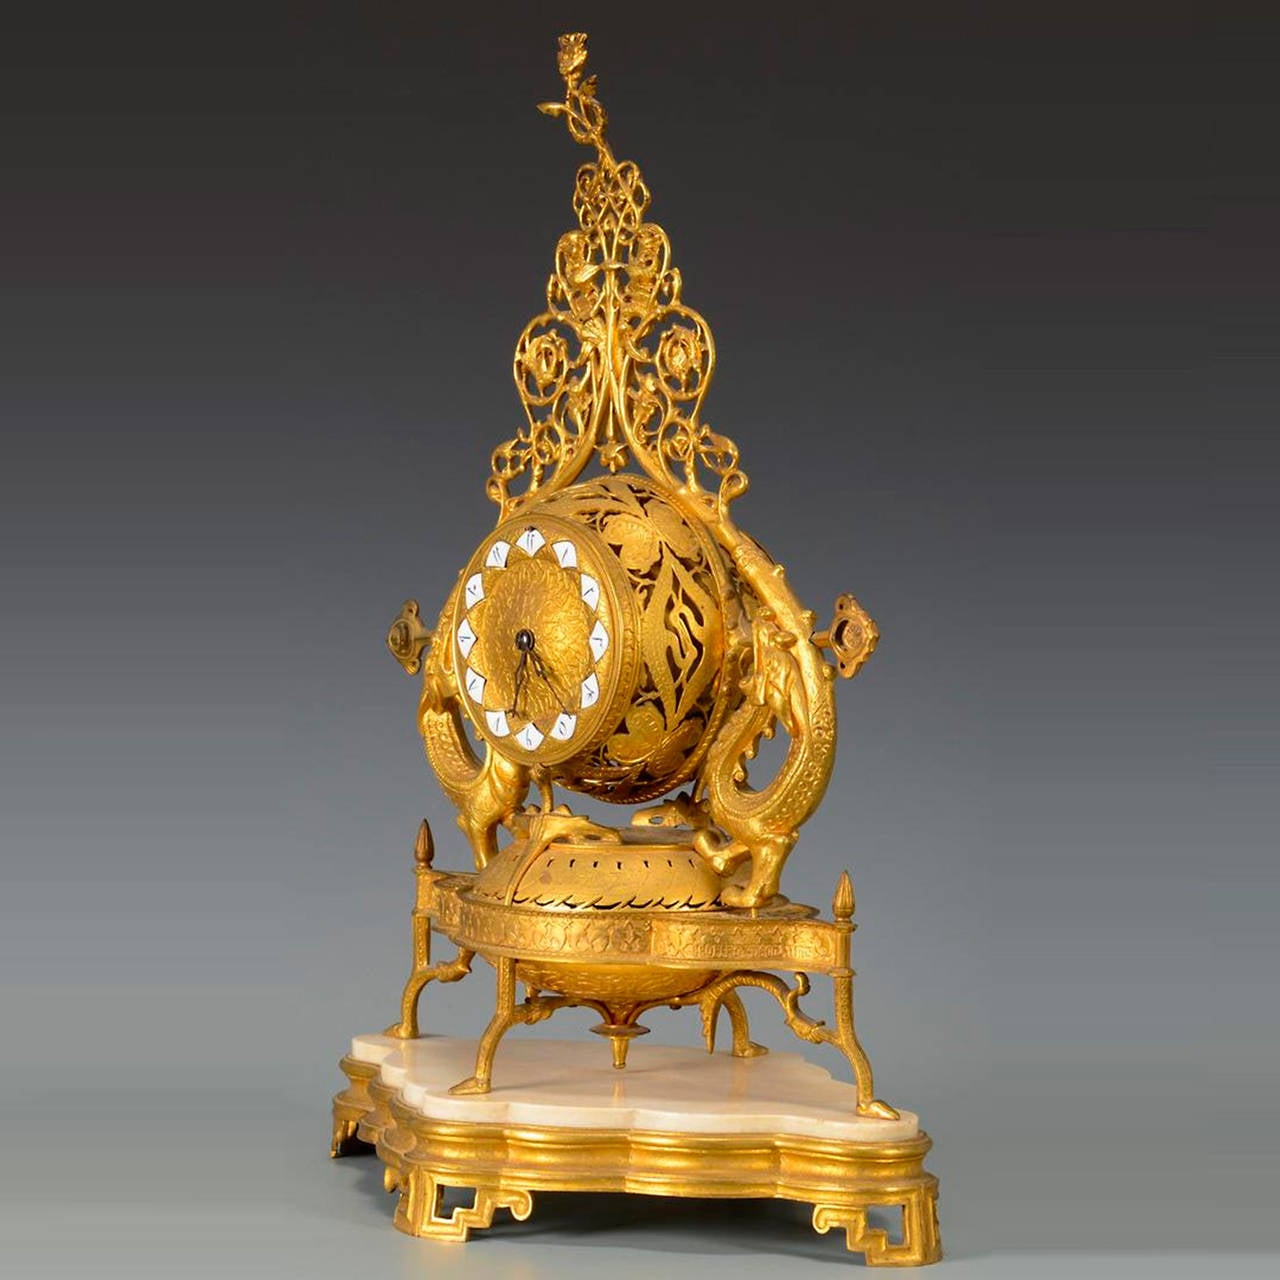 Gilt bronze French mantel clock with Chinese Chippendale feet
The circular dial with pierced sides and enamelled Arabic numerals flanked by dragons, pierced fretwork top and paw feet, resting on a shaped marble and gilt bronze base with Chinese